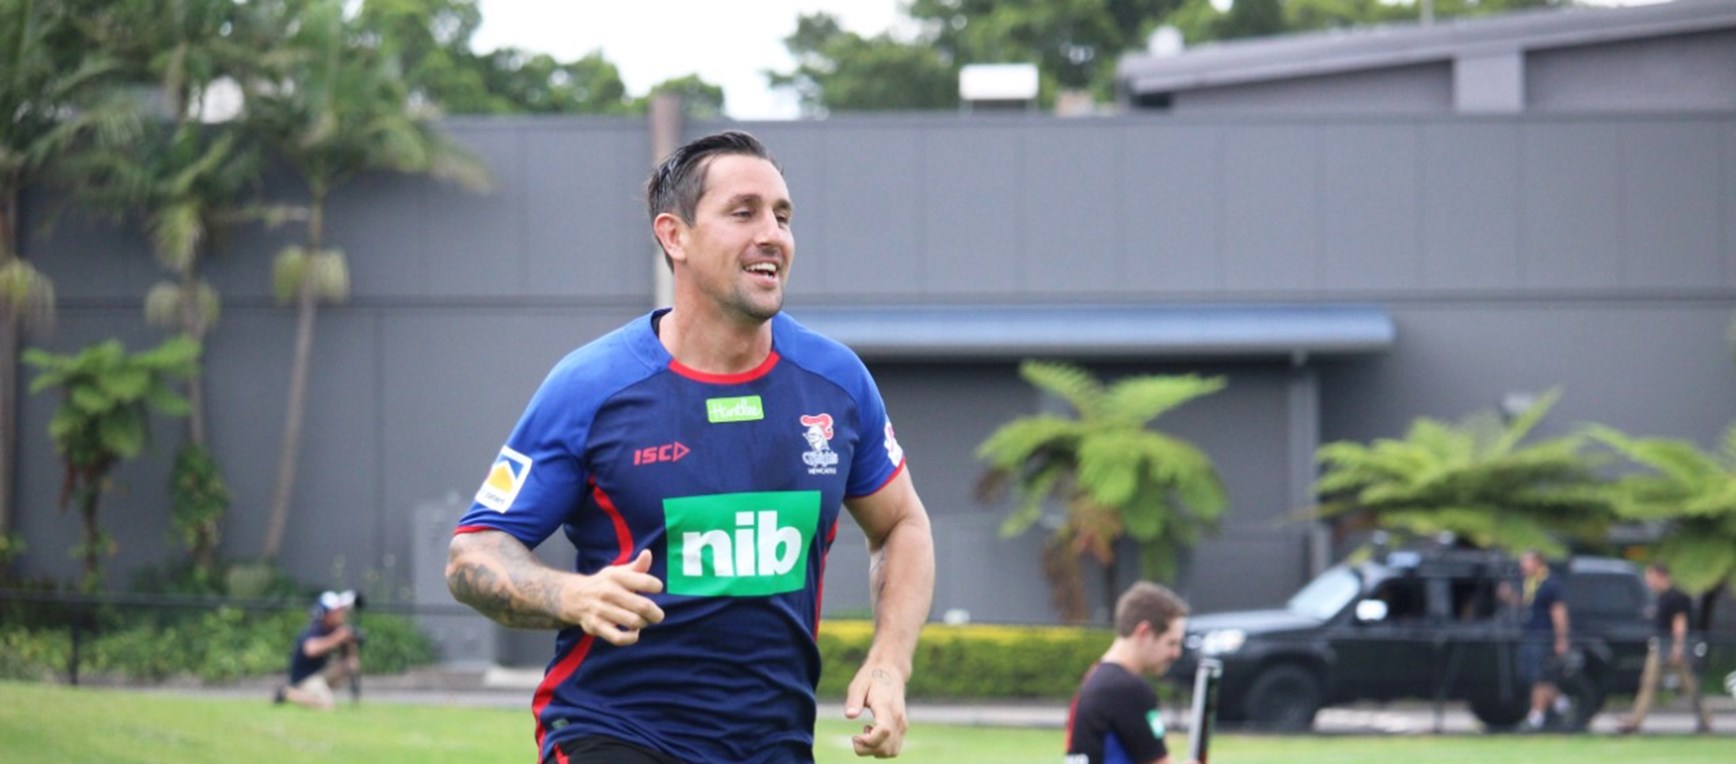 Gallery: Pearce's first day